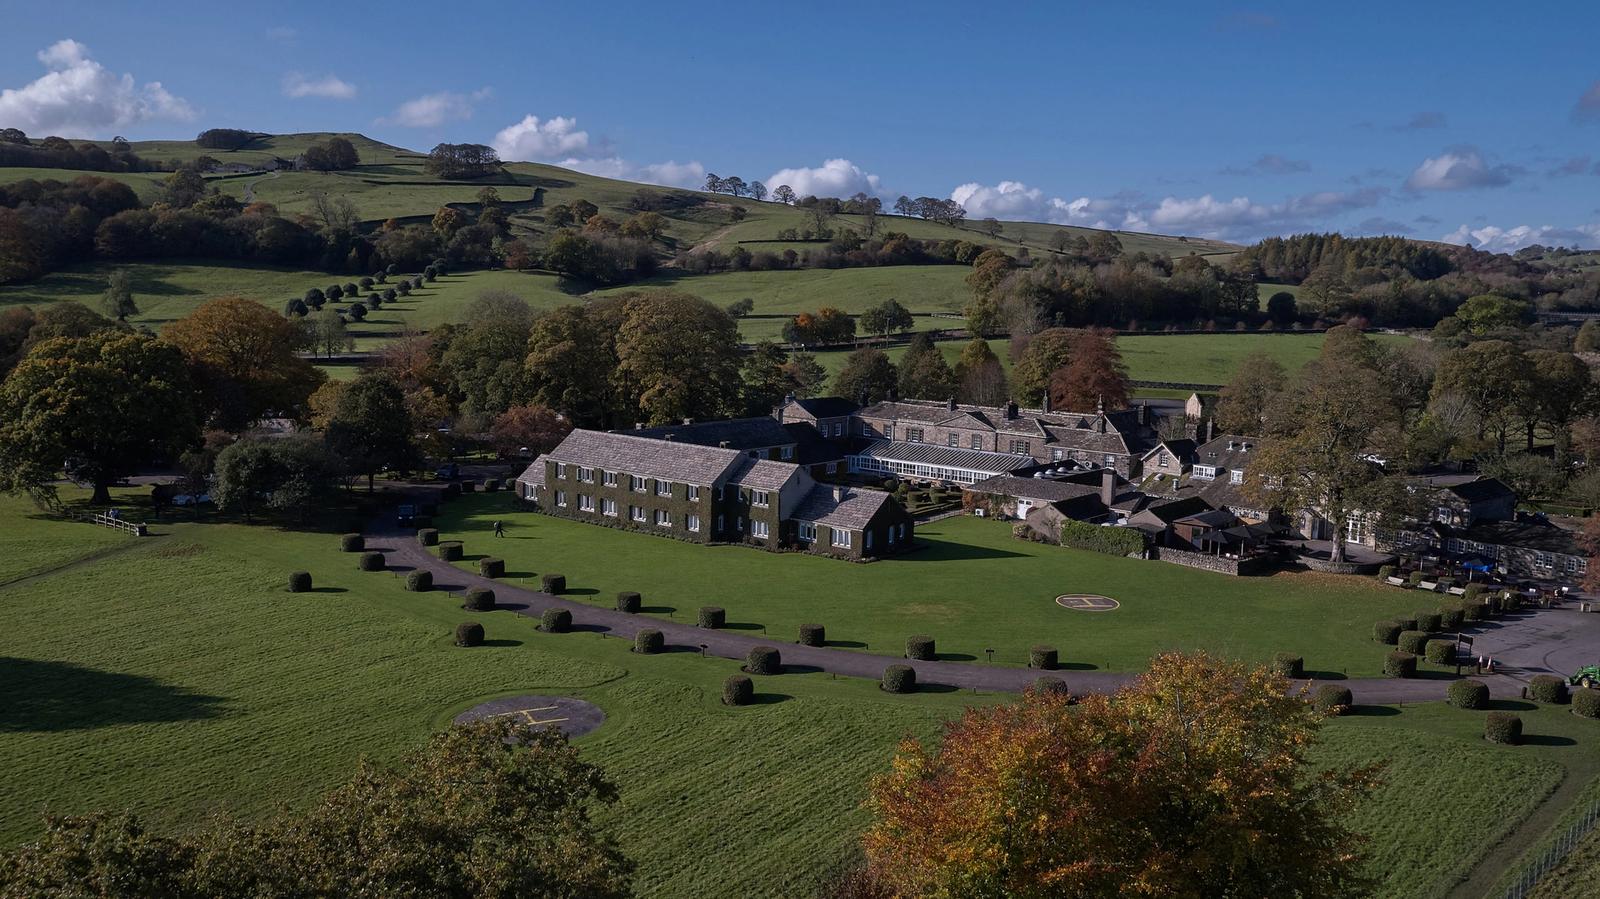 Top hotels for Autumn breaks